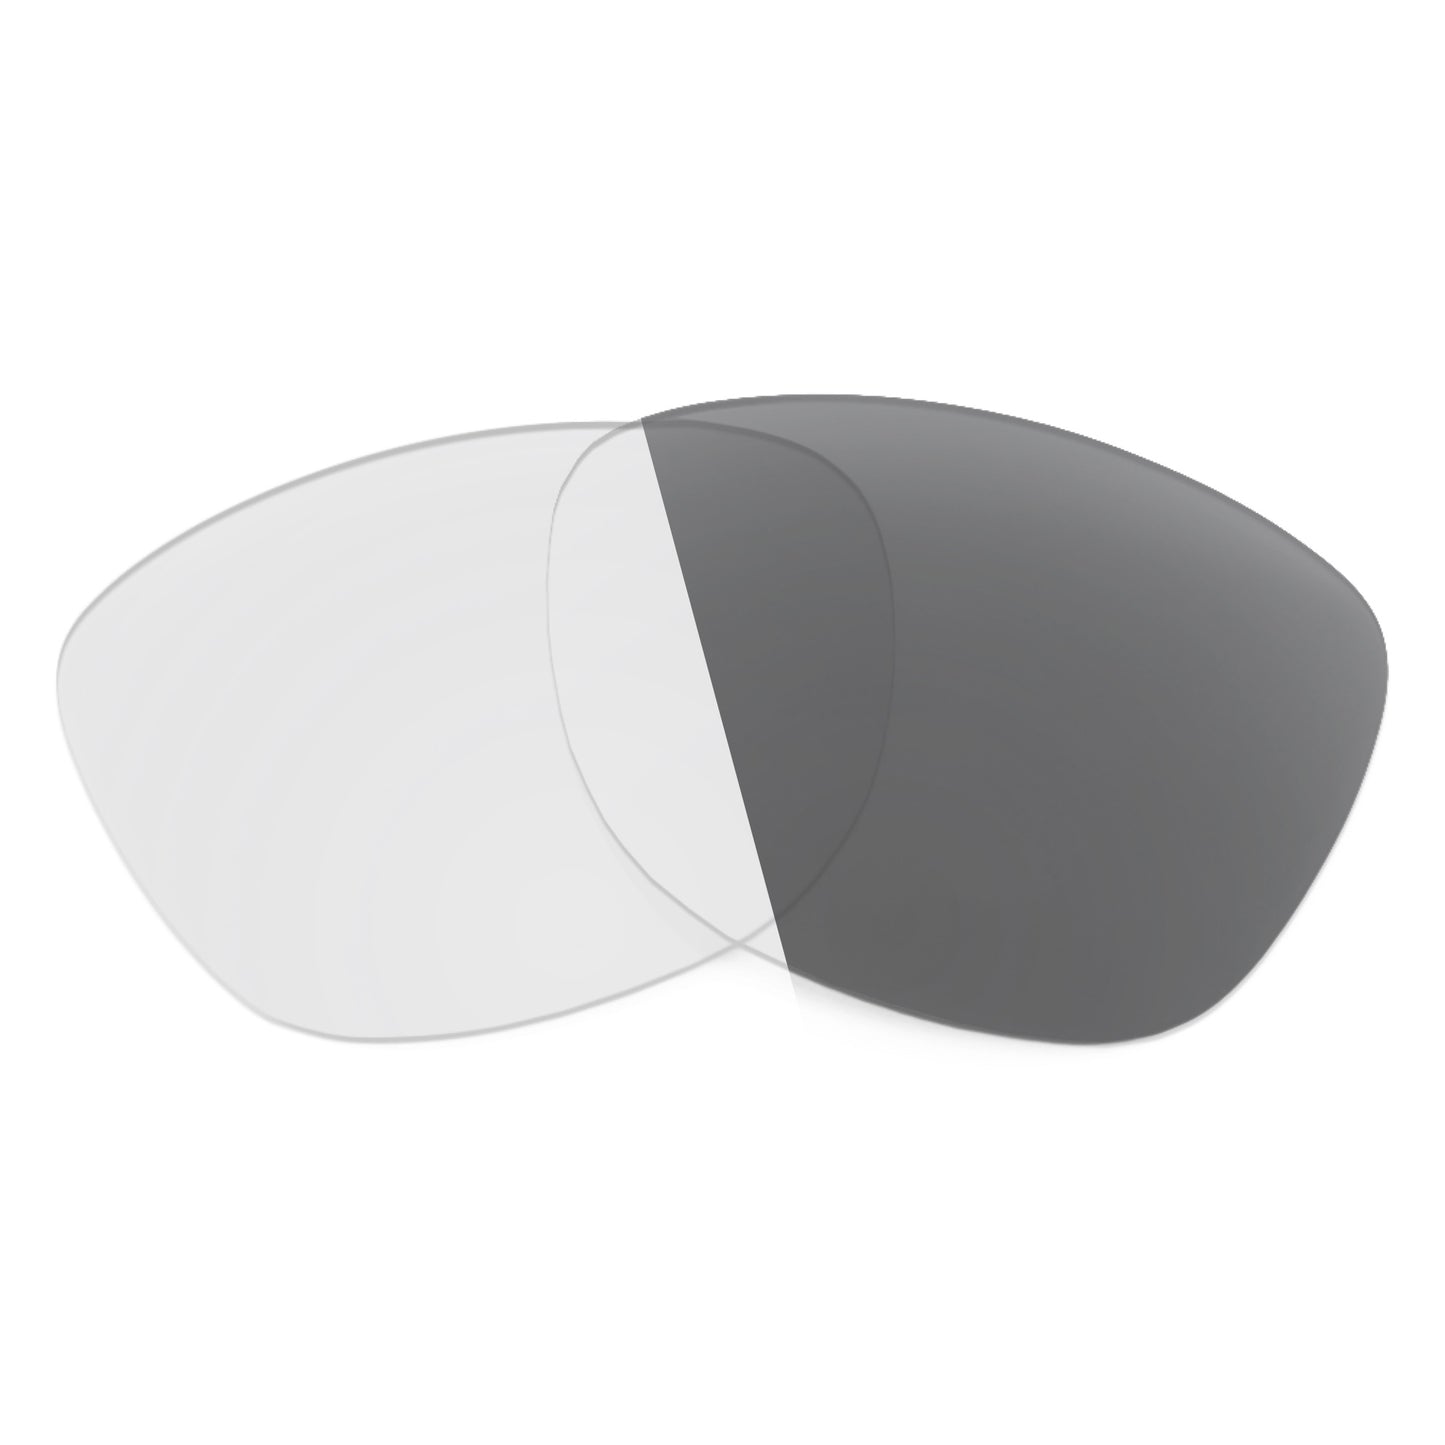 Revant replacement lenses for Ray-Ban RB4237 50mm Non-Polarized Adapt Gray Photochromic